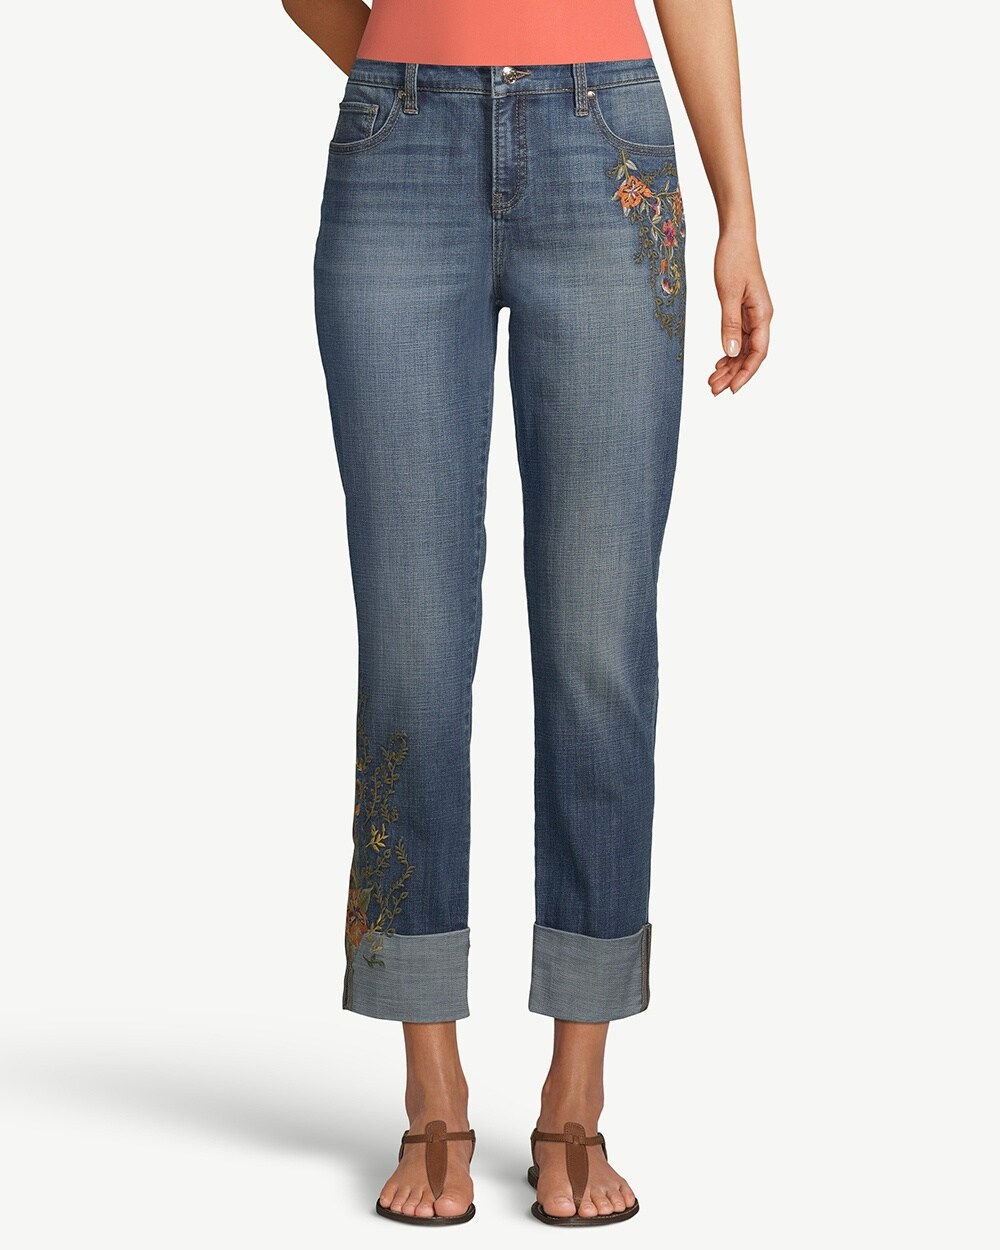 So Slimming Floral Embroidered Girlfriend Ankle Jeans